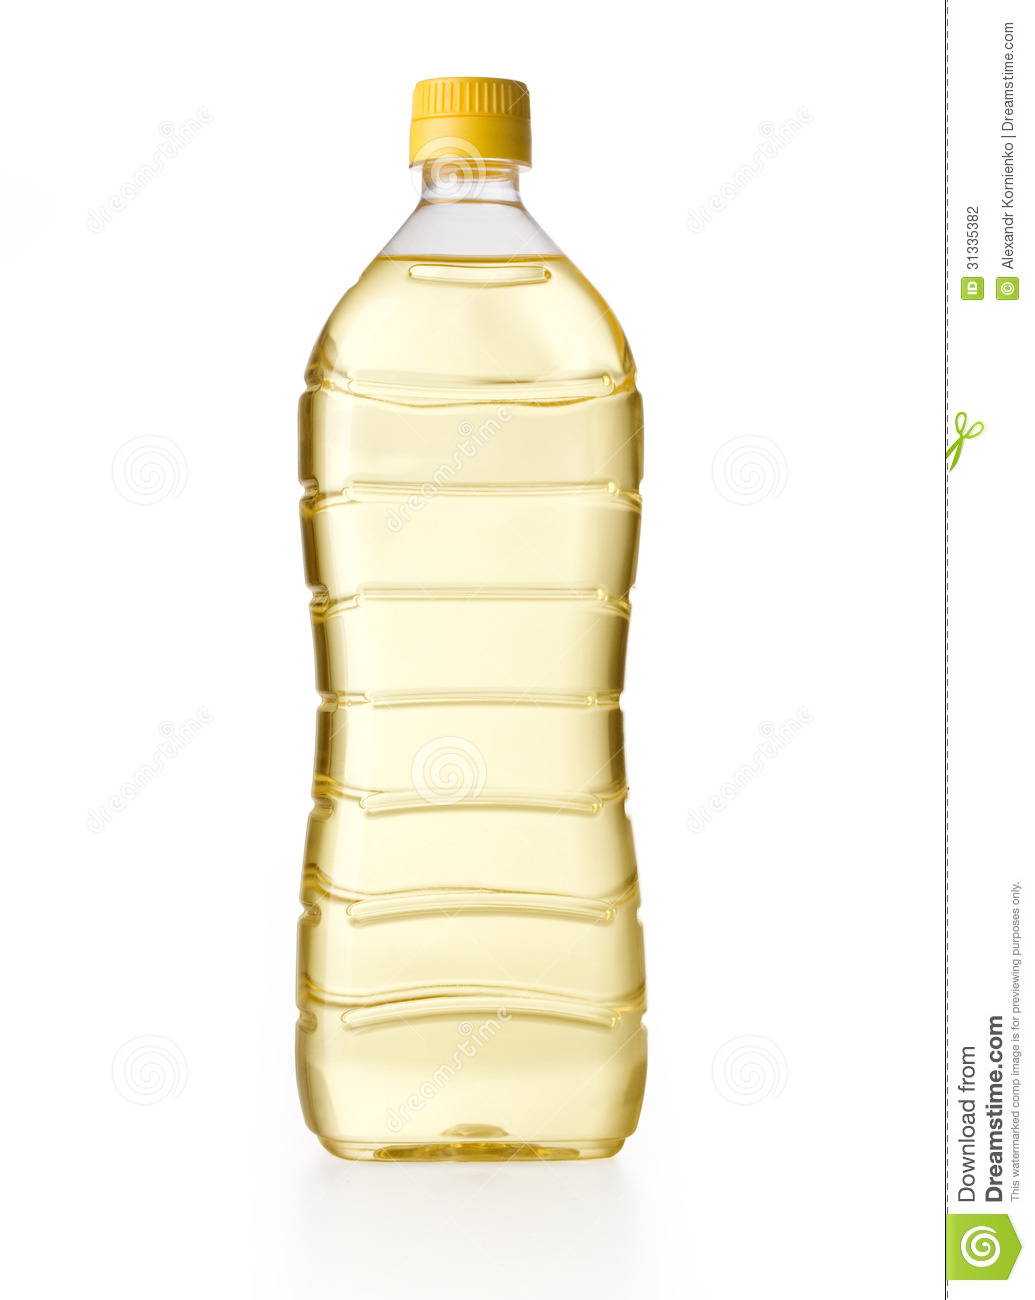 Cooking Oil Bottle Isolated On White With Clipping Path